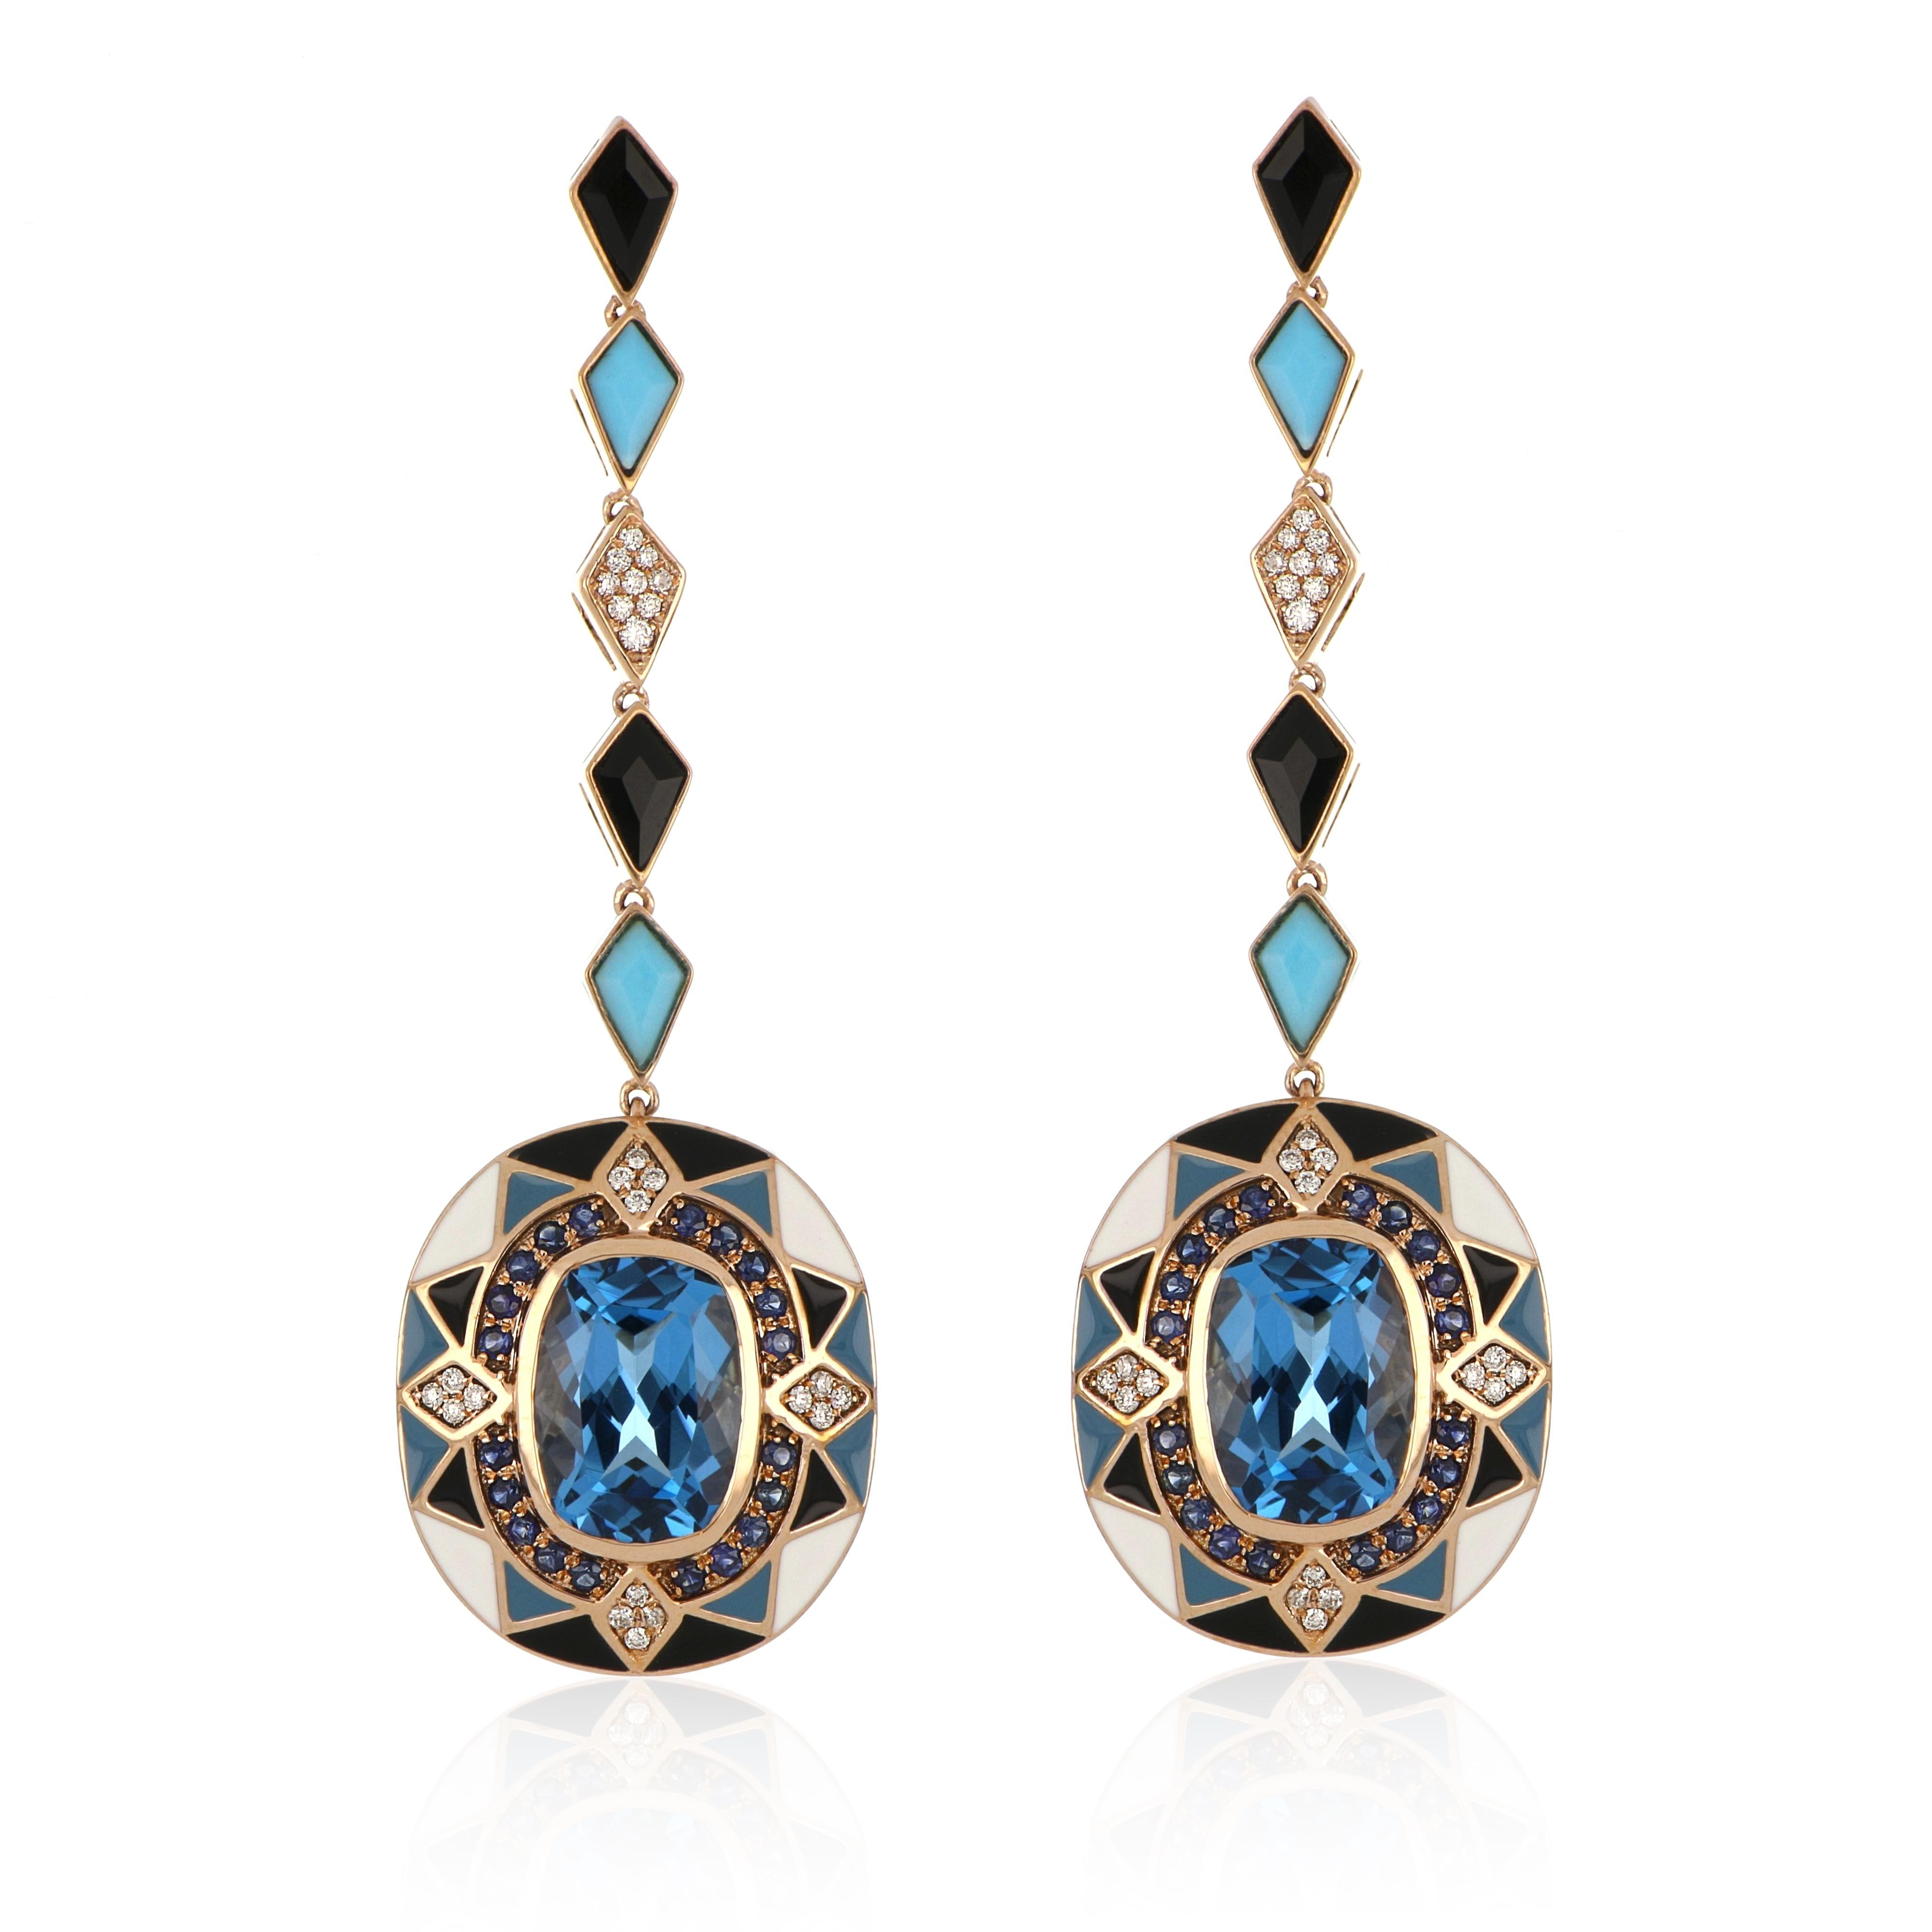 Elegant and exquisite Enamel Cocktail 14 K Earrings center set with 8.80 Cts. Cushion Cut vibrant Swiss Blue Topaz, surrounded by Blue Sapphire Halo 0.42 Cts. accented with special cut Kite Shaped Black Spinel 0.60 Cts and Turquoise 0.62 cts along